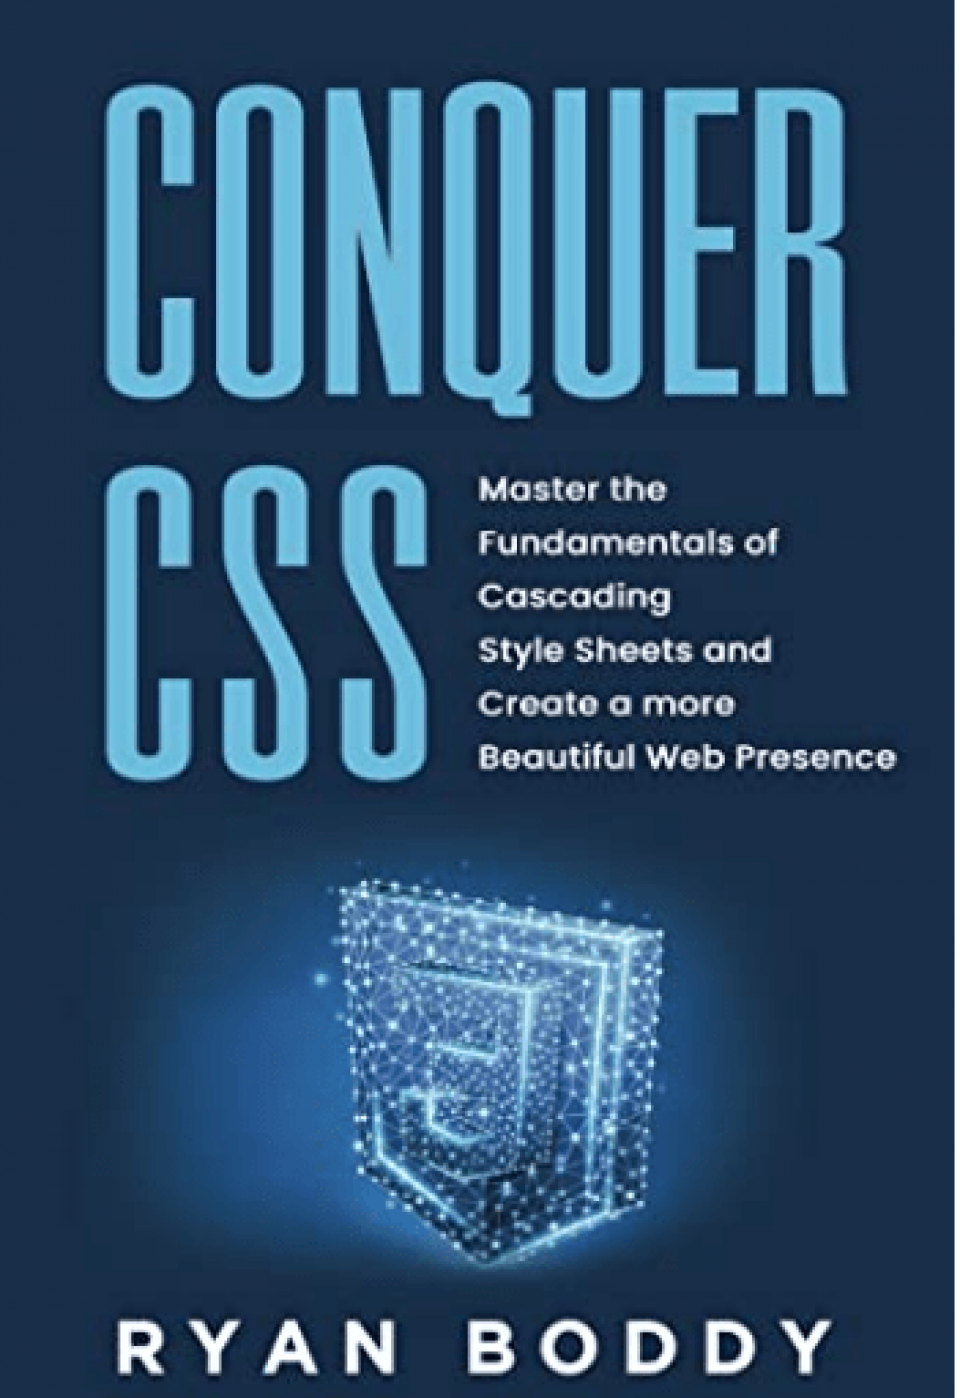 Front cover of Conquer CSS